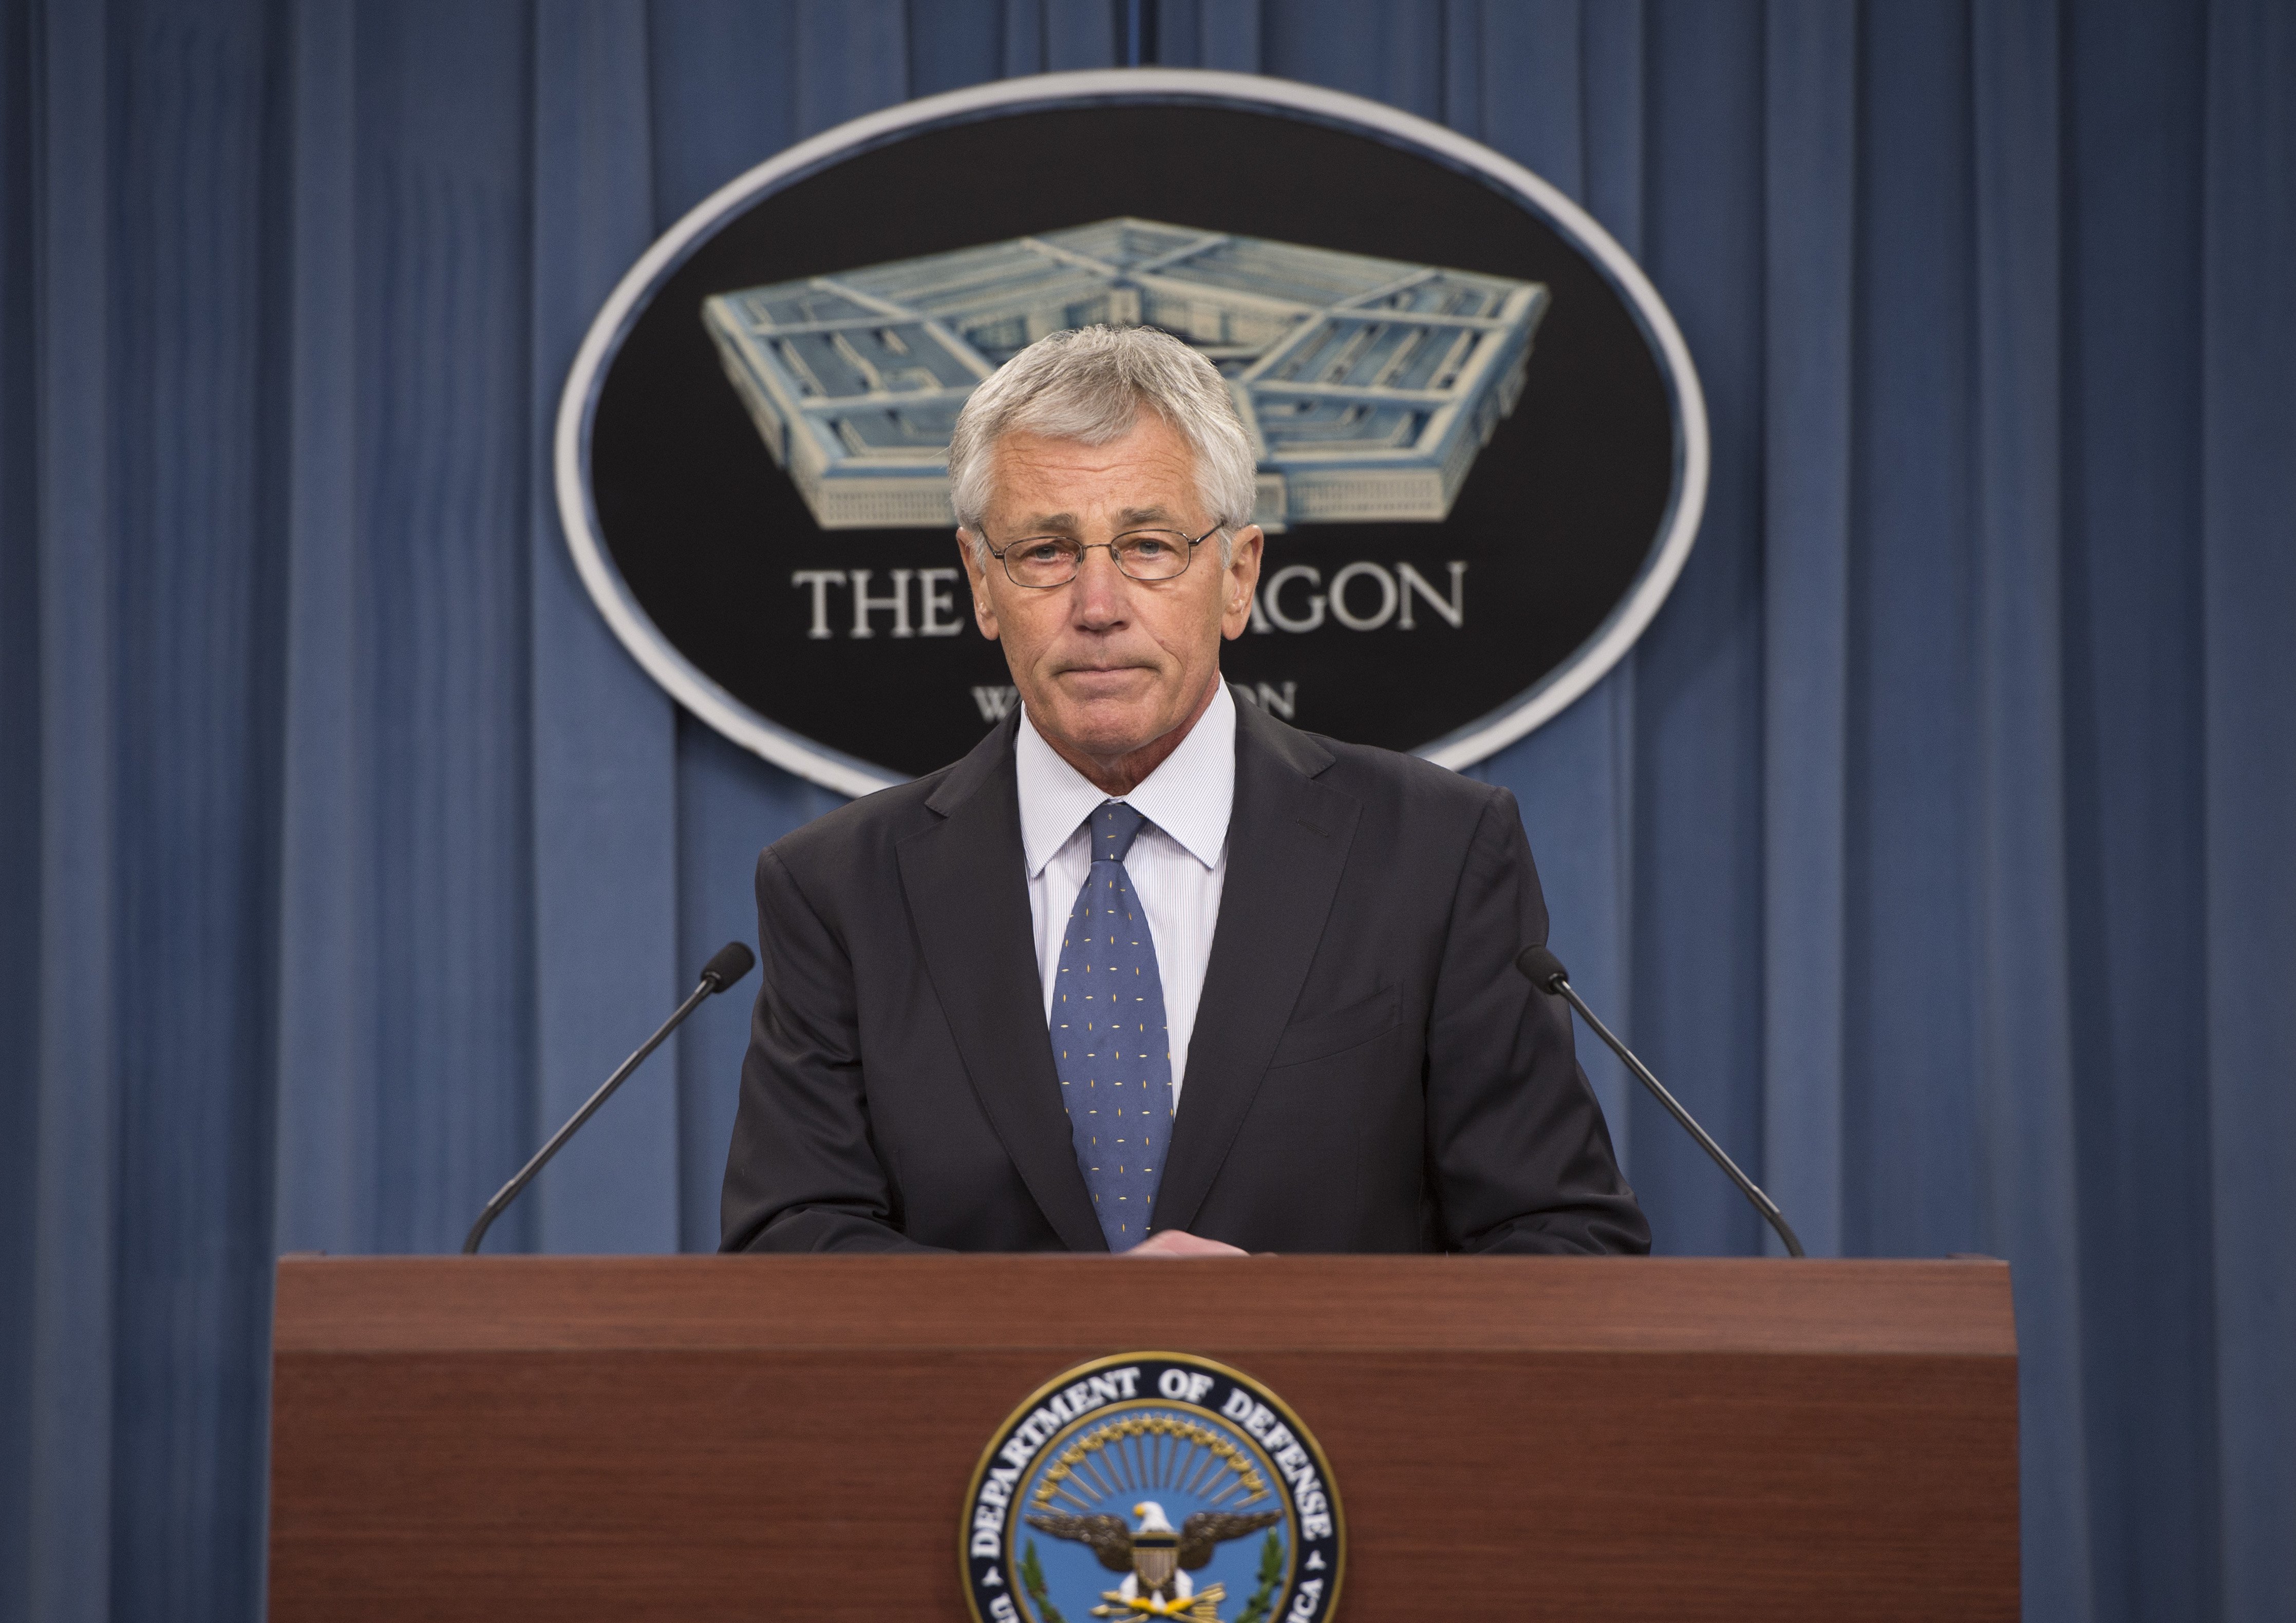 U.S. Defense Secretary Chuck Hagel meets with Pentagon media to outline a five year Pentagon budget what will shrink the Army forces and the rest of the DOD, on Feb. 24, 2014. (Greg E. Mathieson, Sr—Landov)